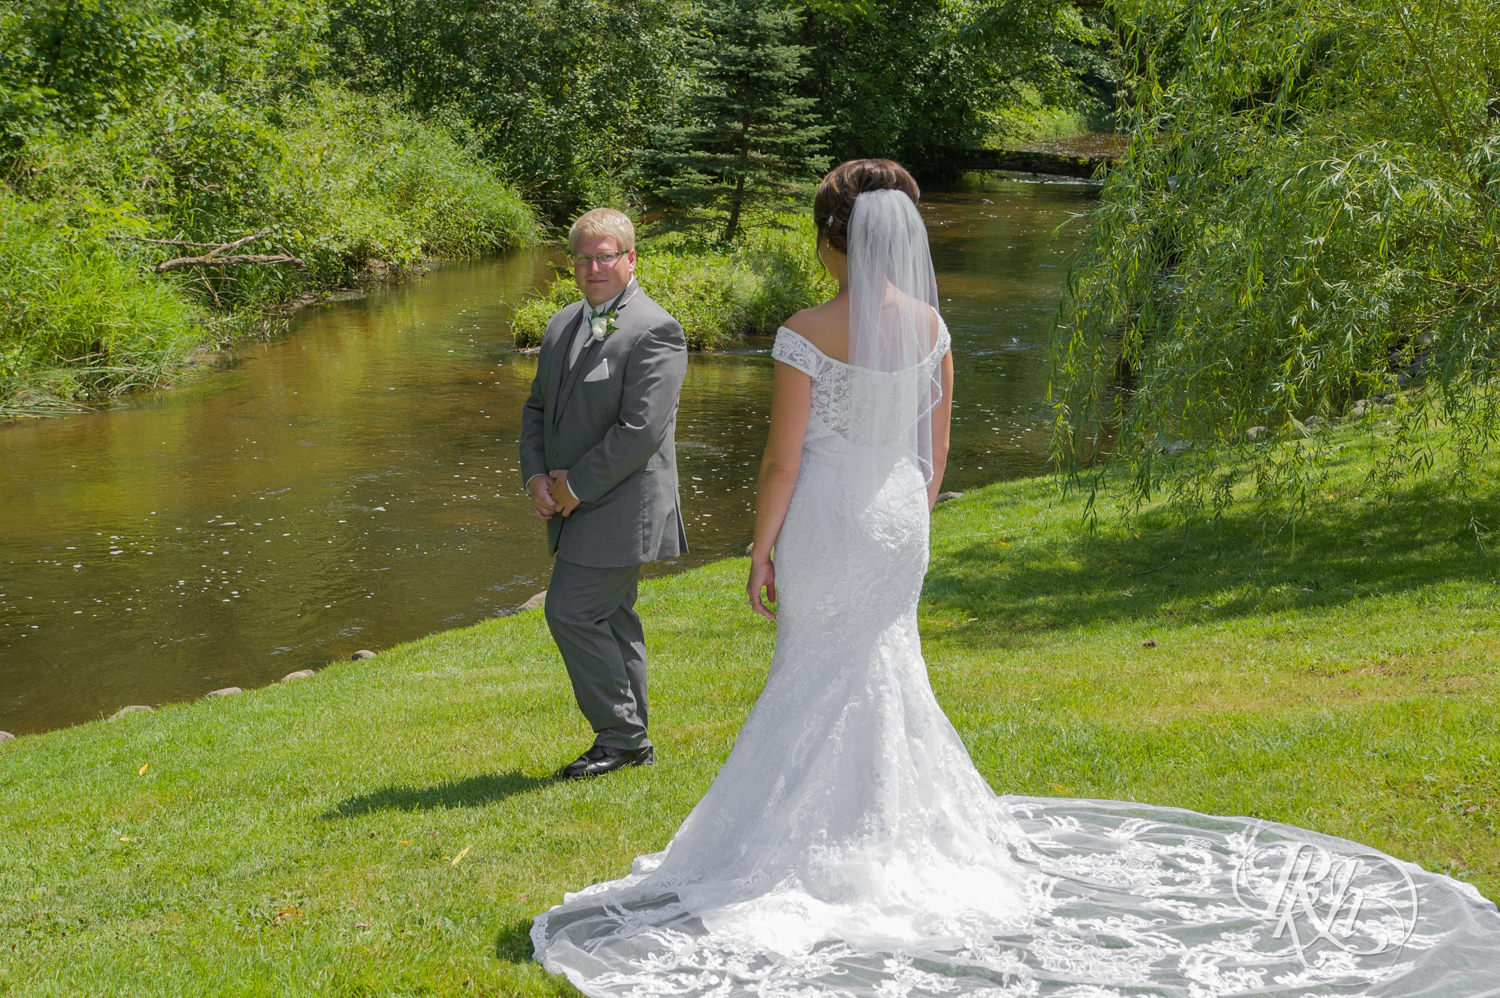 Bride and groom share first look at Creekside Farm Weddings and Events in Rush City, Minnesota.